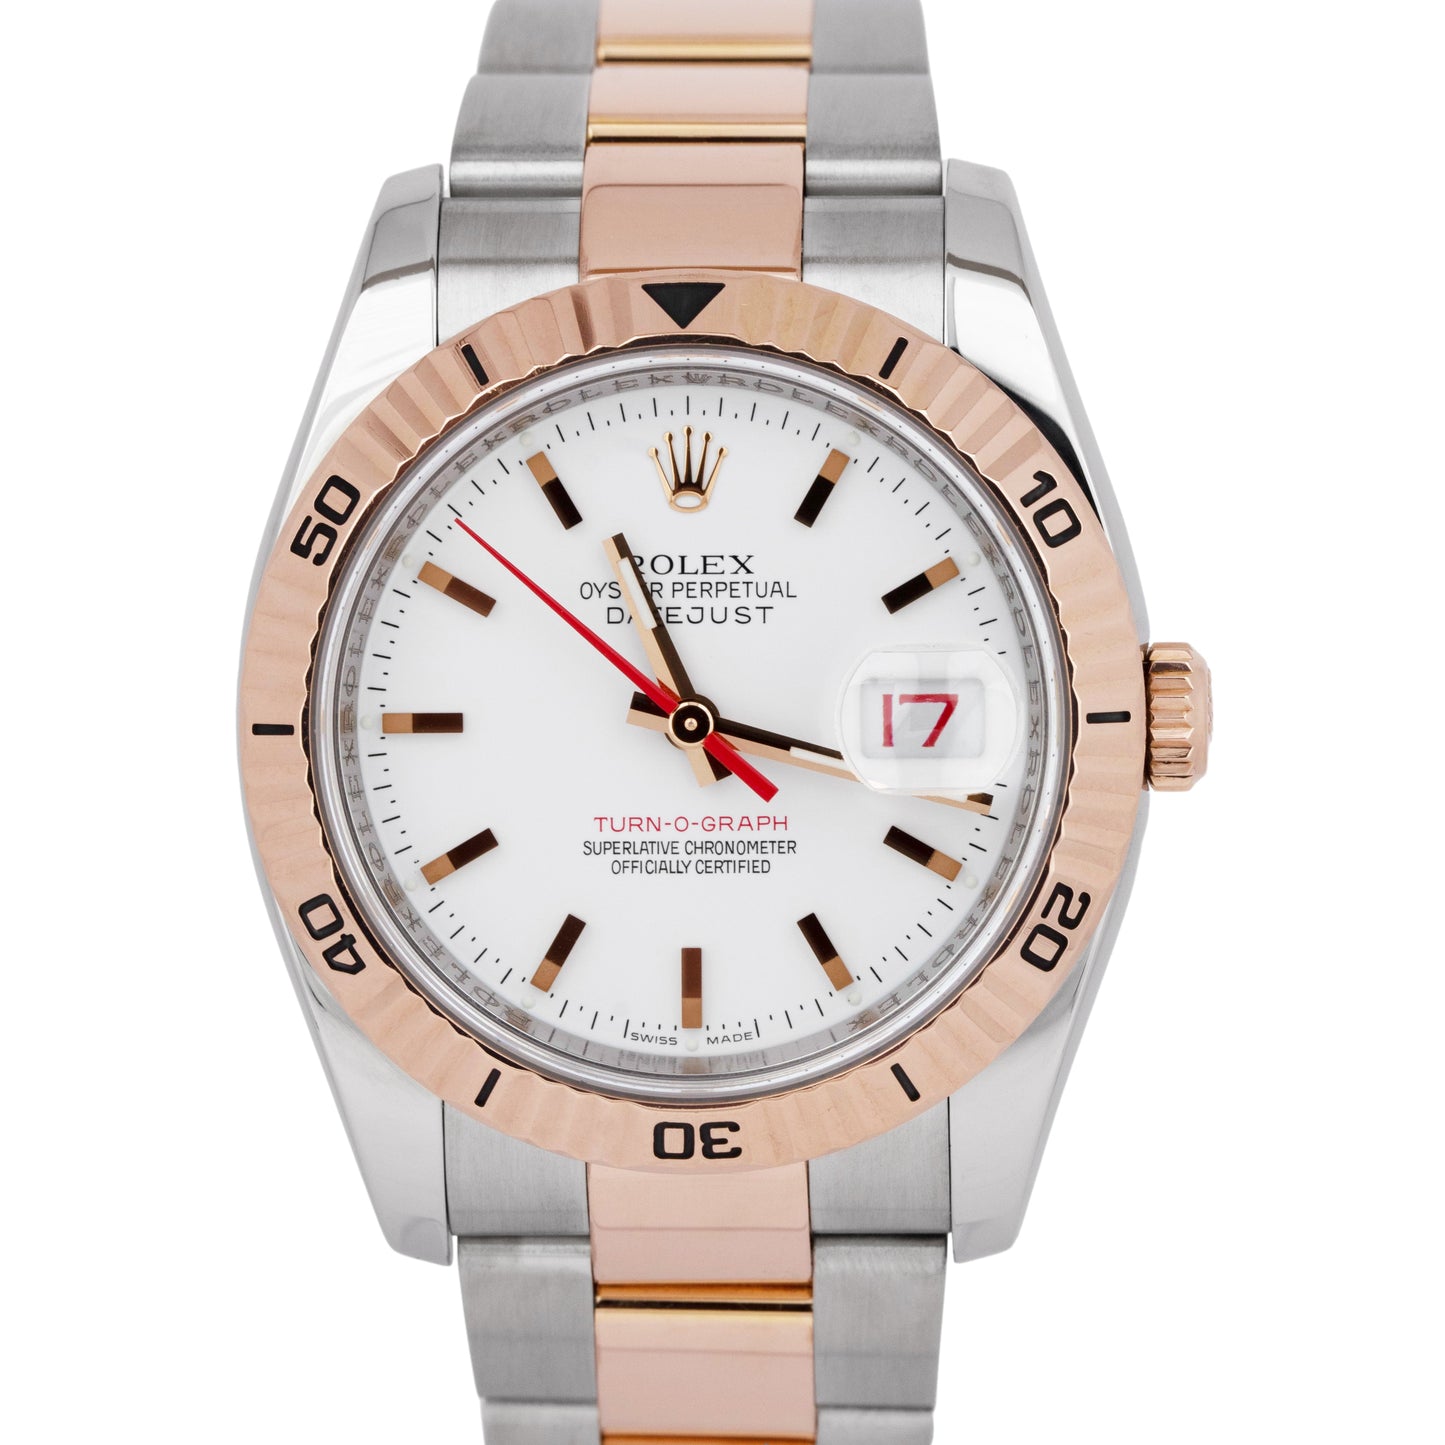 RSC 2021 Rolex DateJust Turn-O-Graph 36mm White Two-Tone Rose Gold 116261